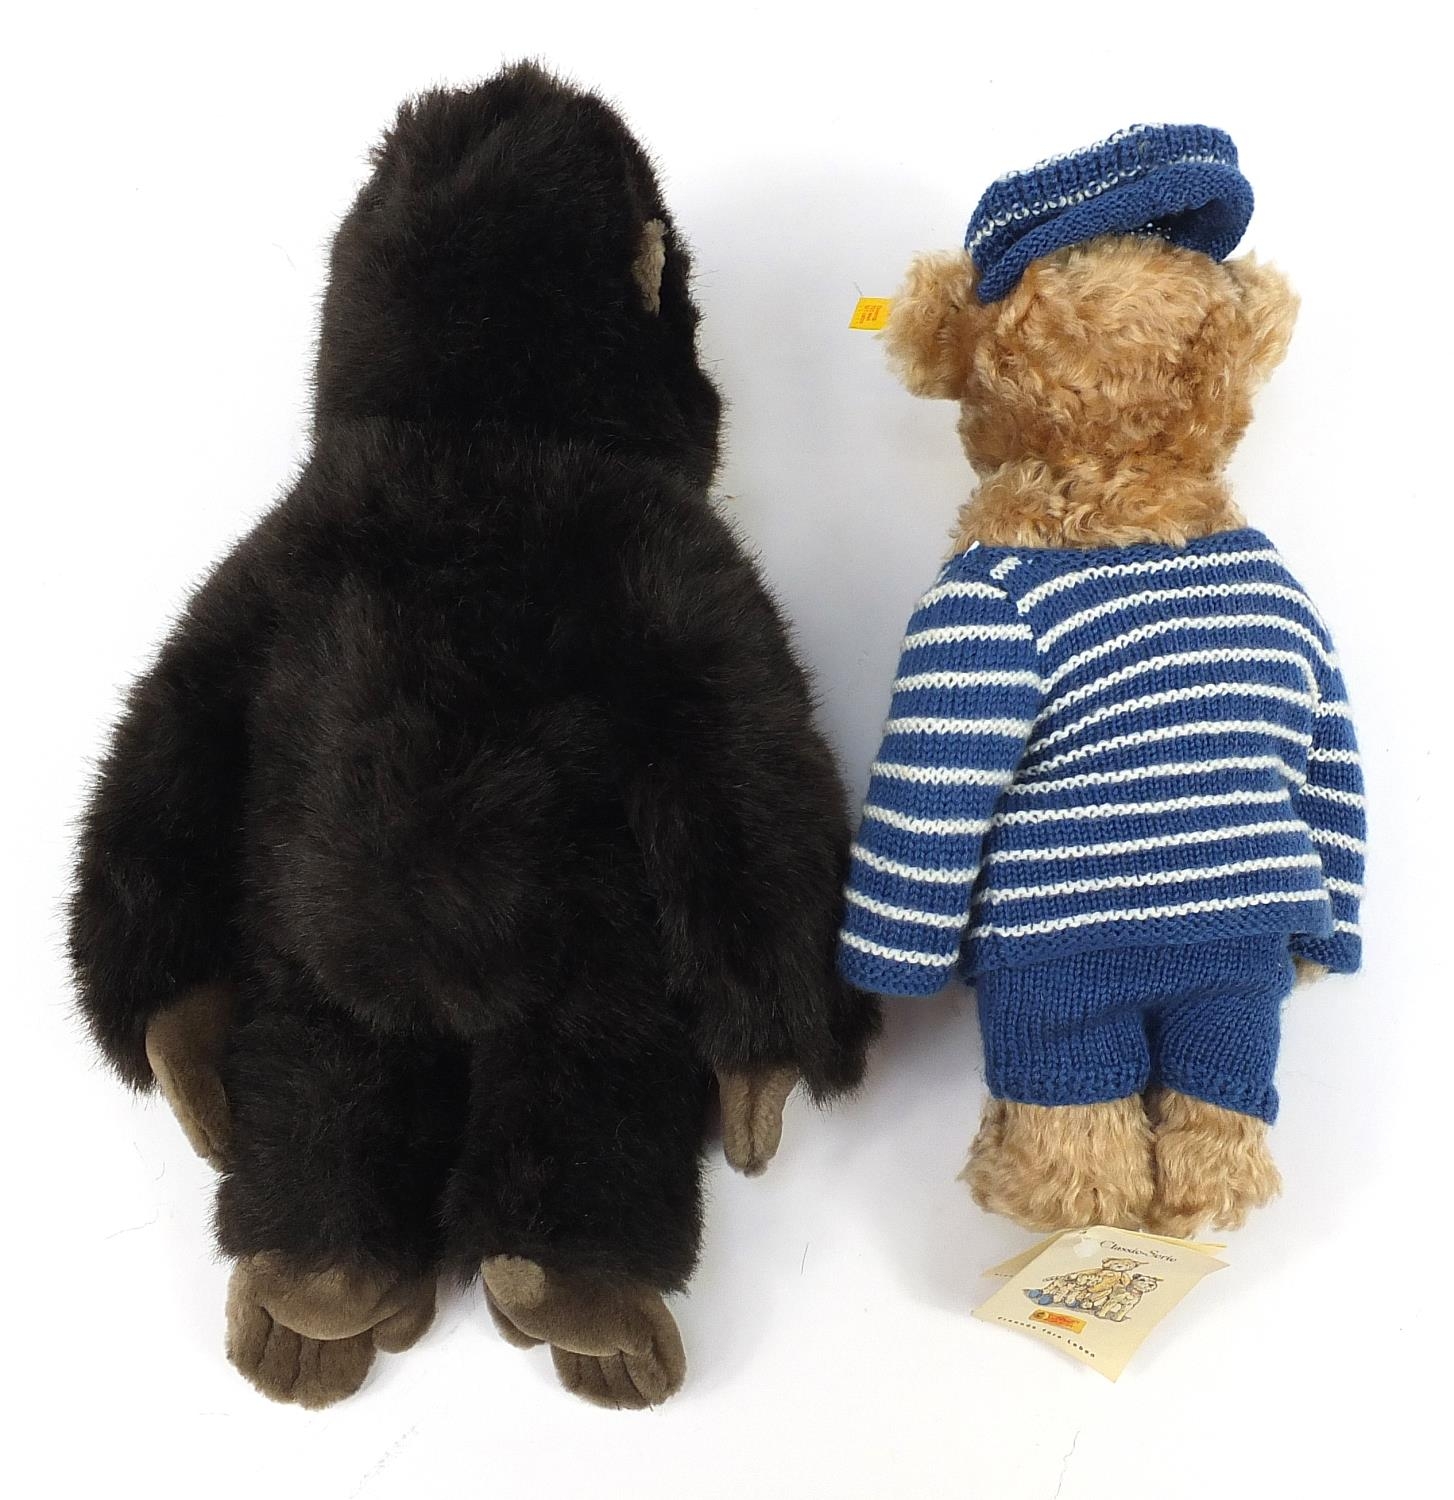 Steiff soft toy gorilla and Classic Series 1907 teddy bear, the largest 43cm high - Image 2 of 4